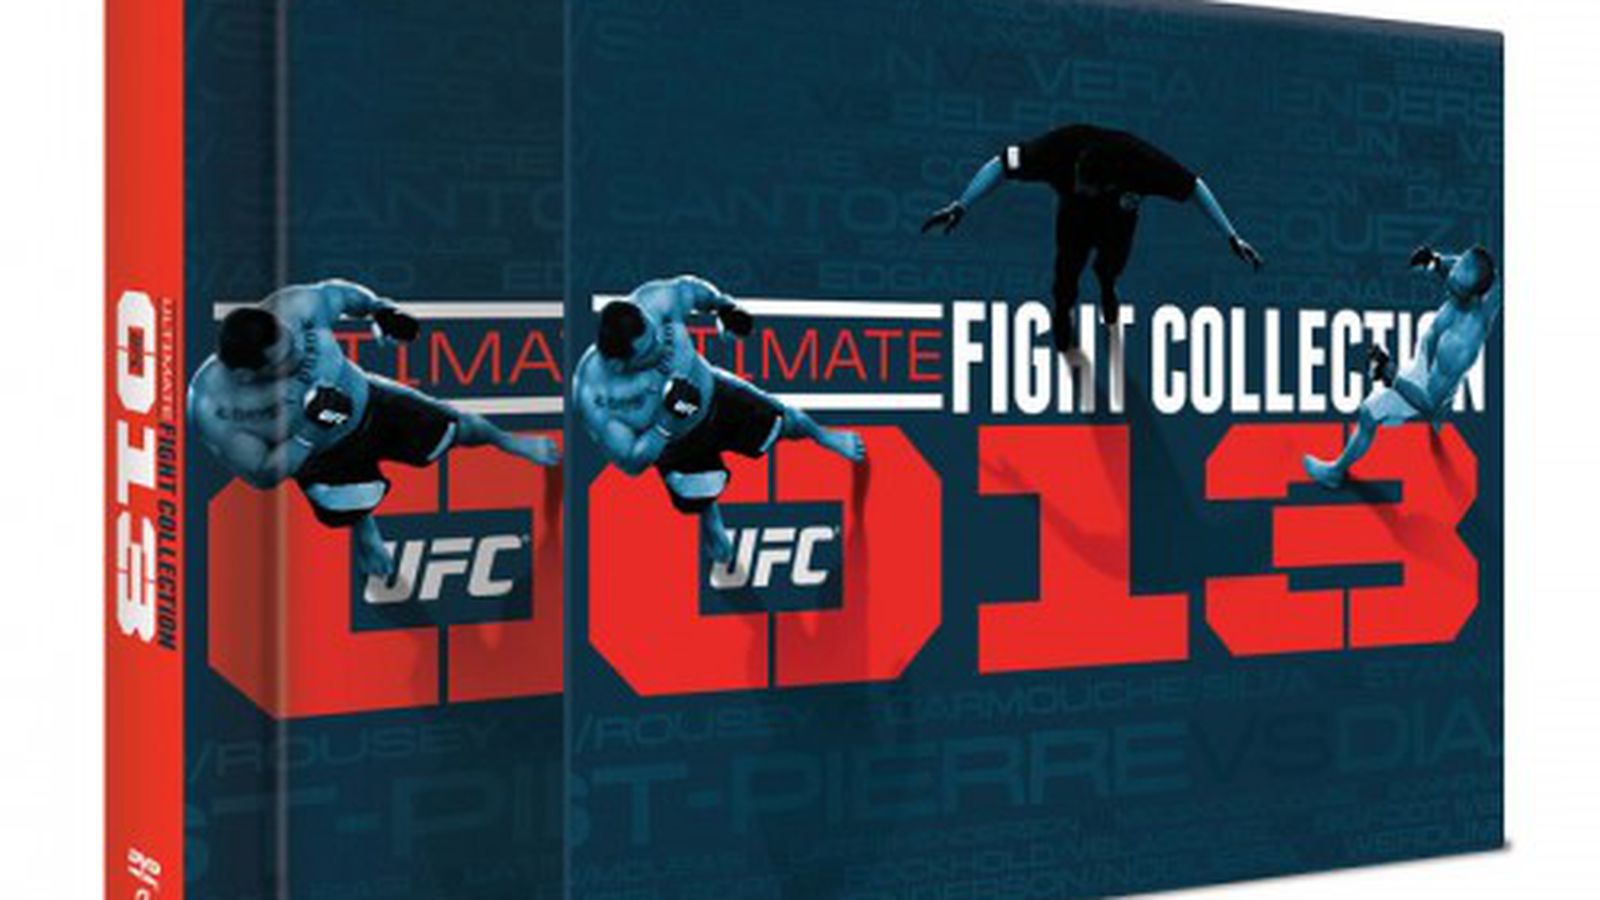 Review! UFC Ultimate Fight Collection 2013 DVD Set - MMAmania 